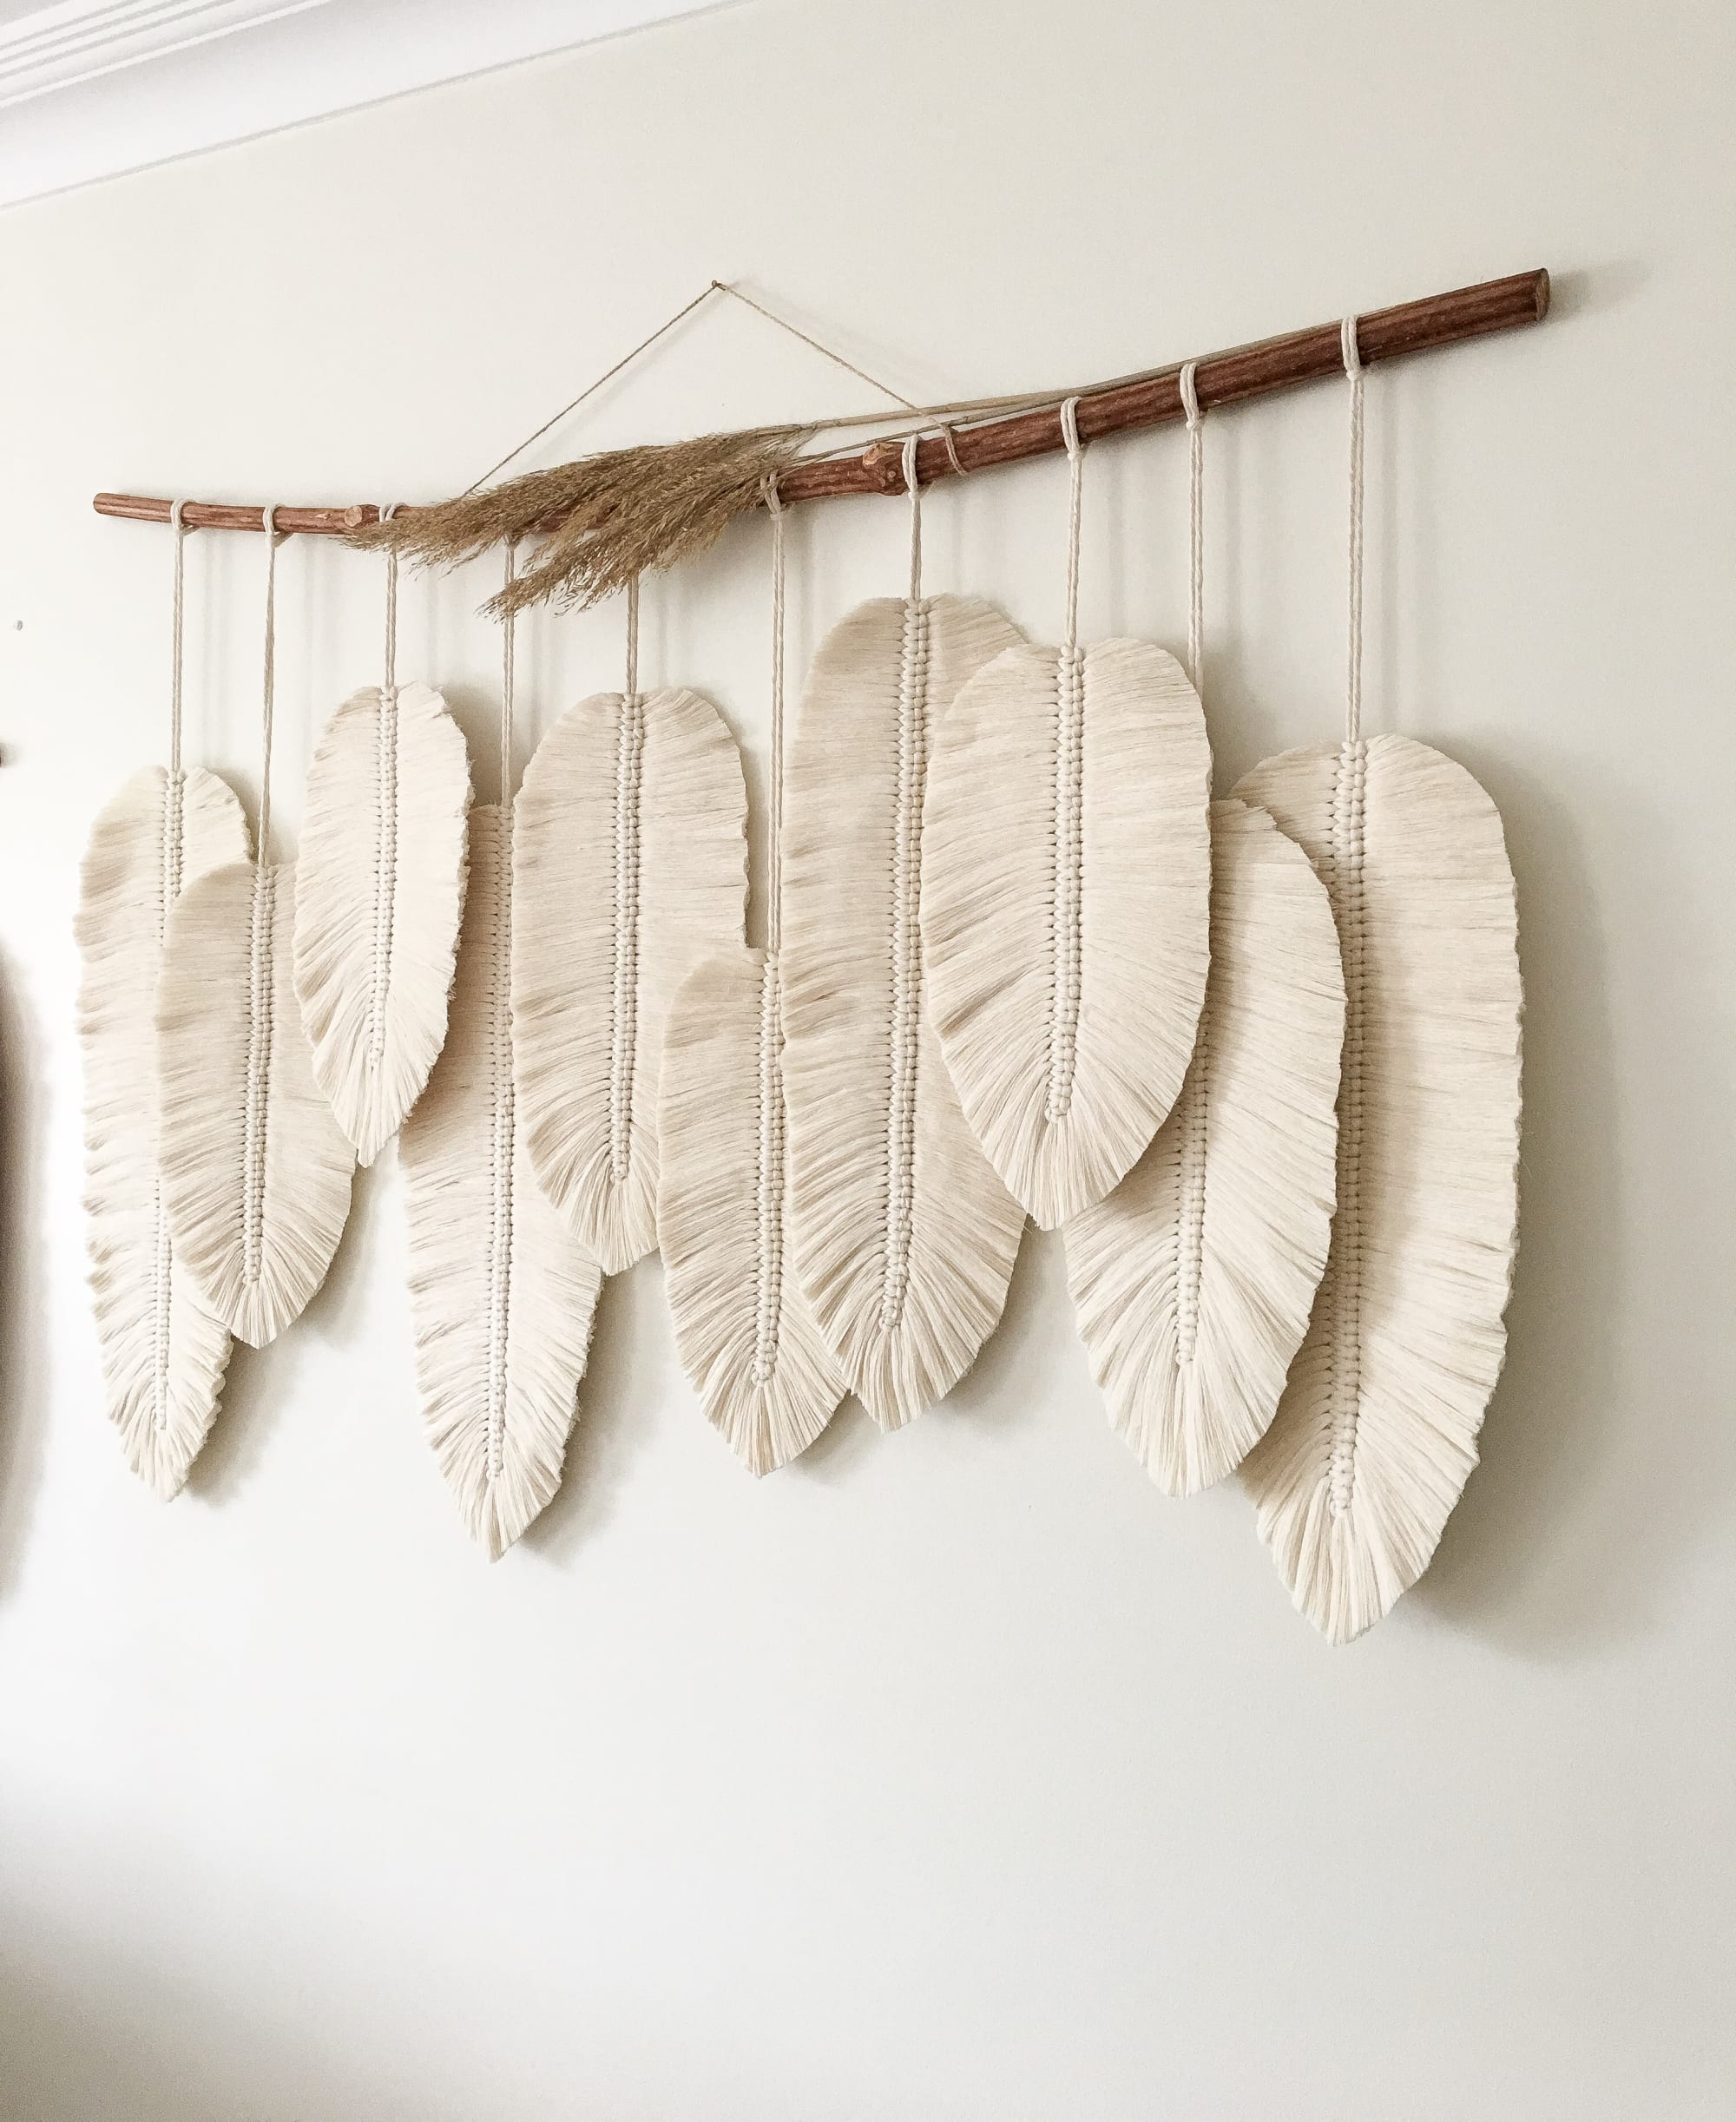 fabric-stiffener-for-macrame-feathers - Endlessly Inspired